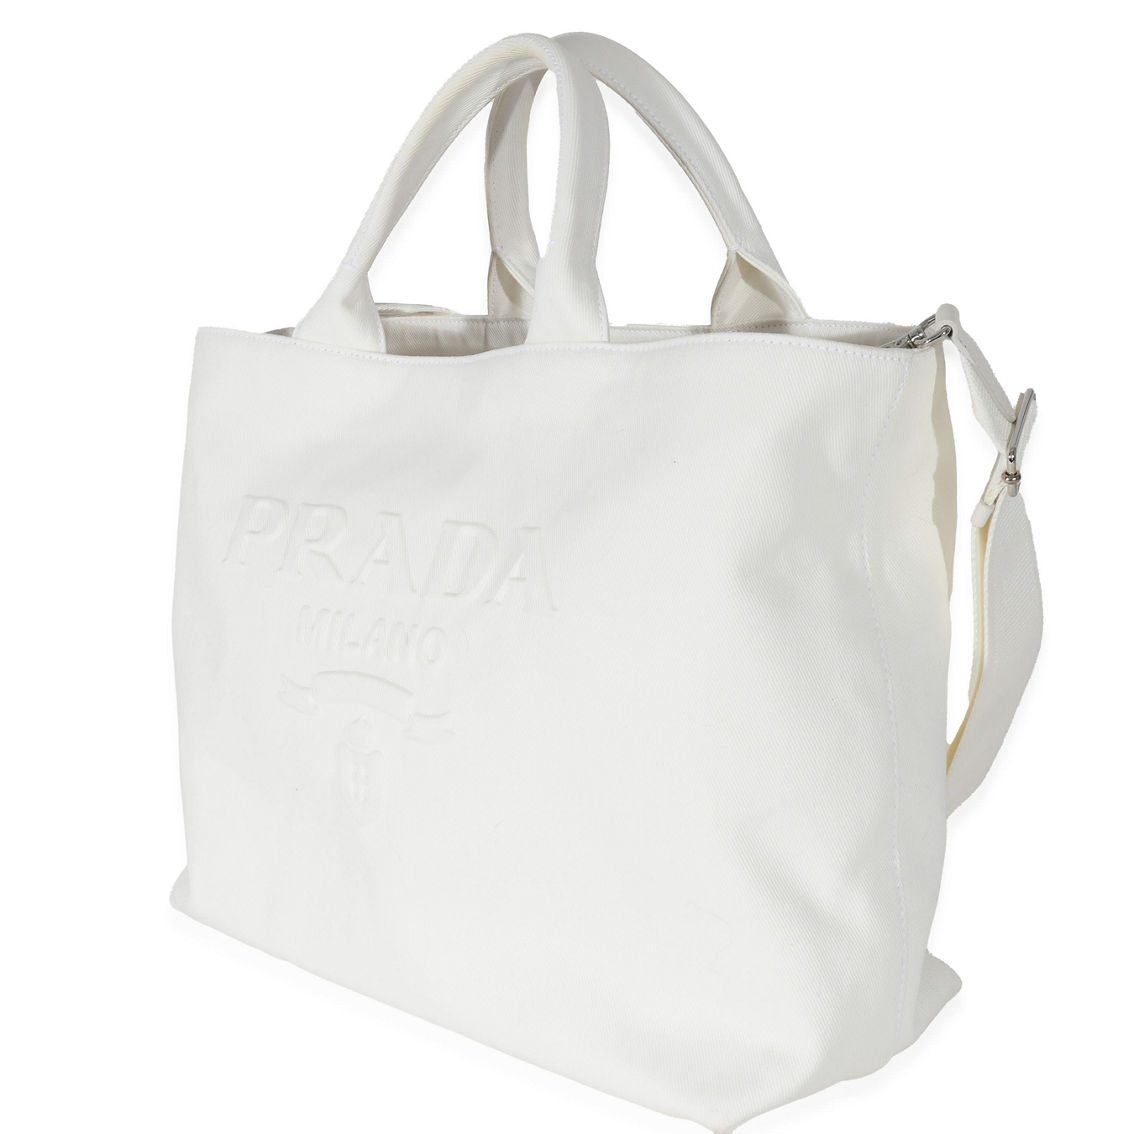 Prada Drill Tote Pre-Owned - Image 2 of 4